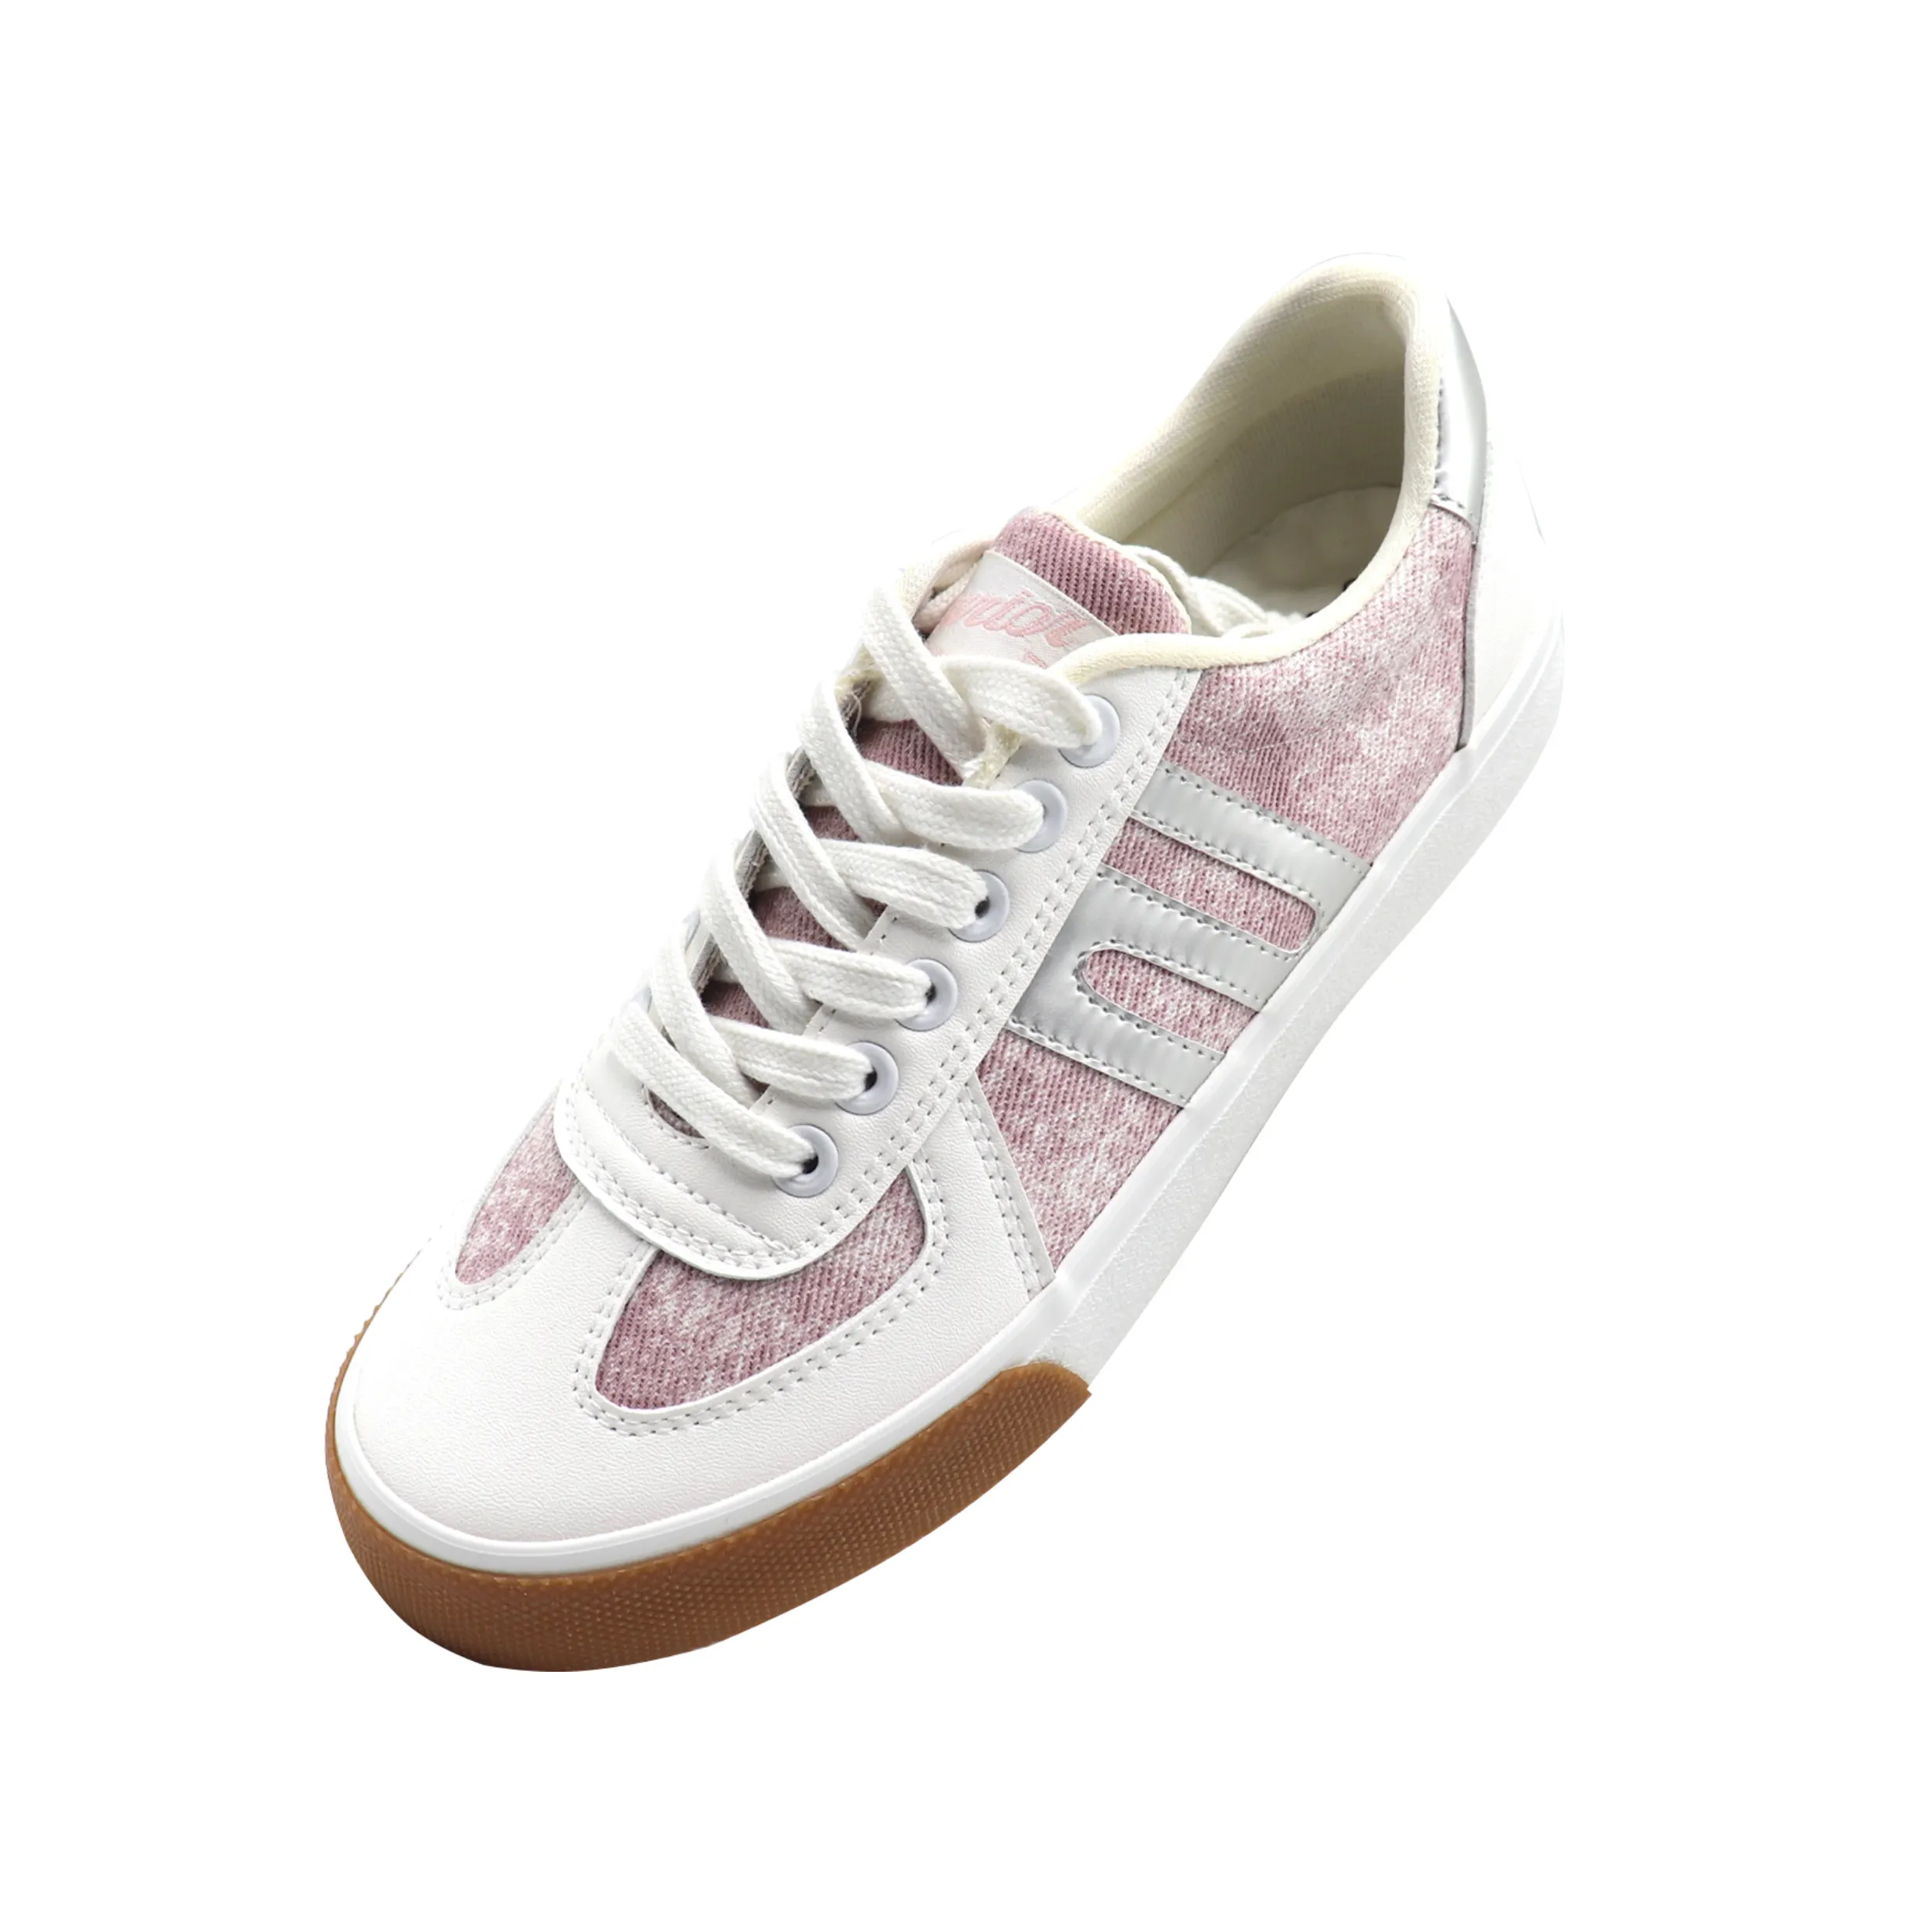 Wholesale popular pink printed canvas shoes high quality low-top flat shoes unisex footwear